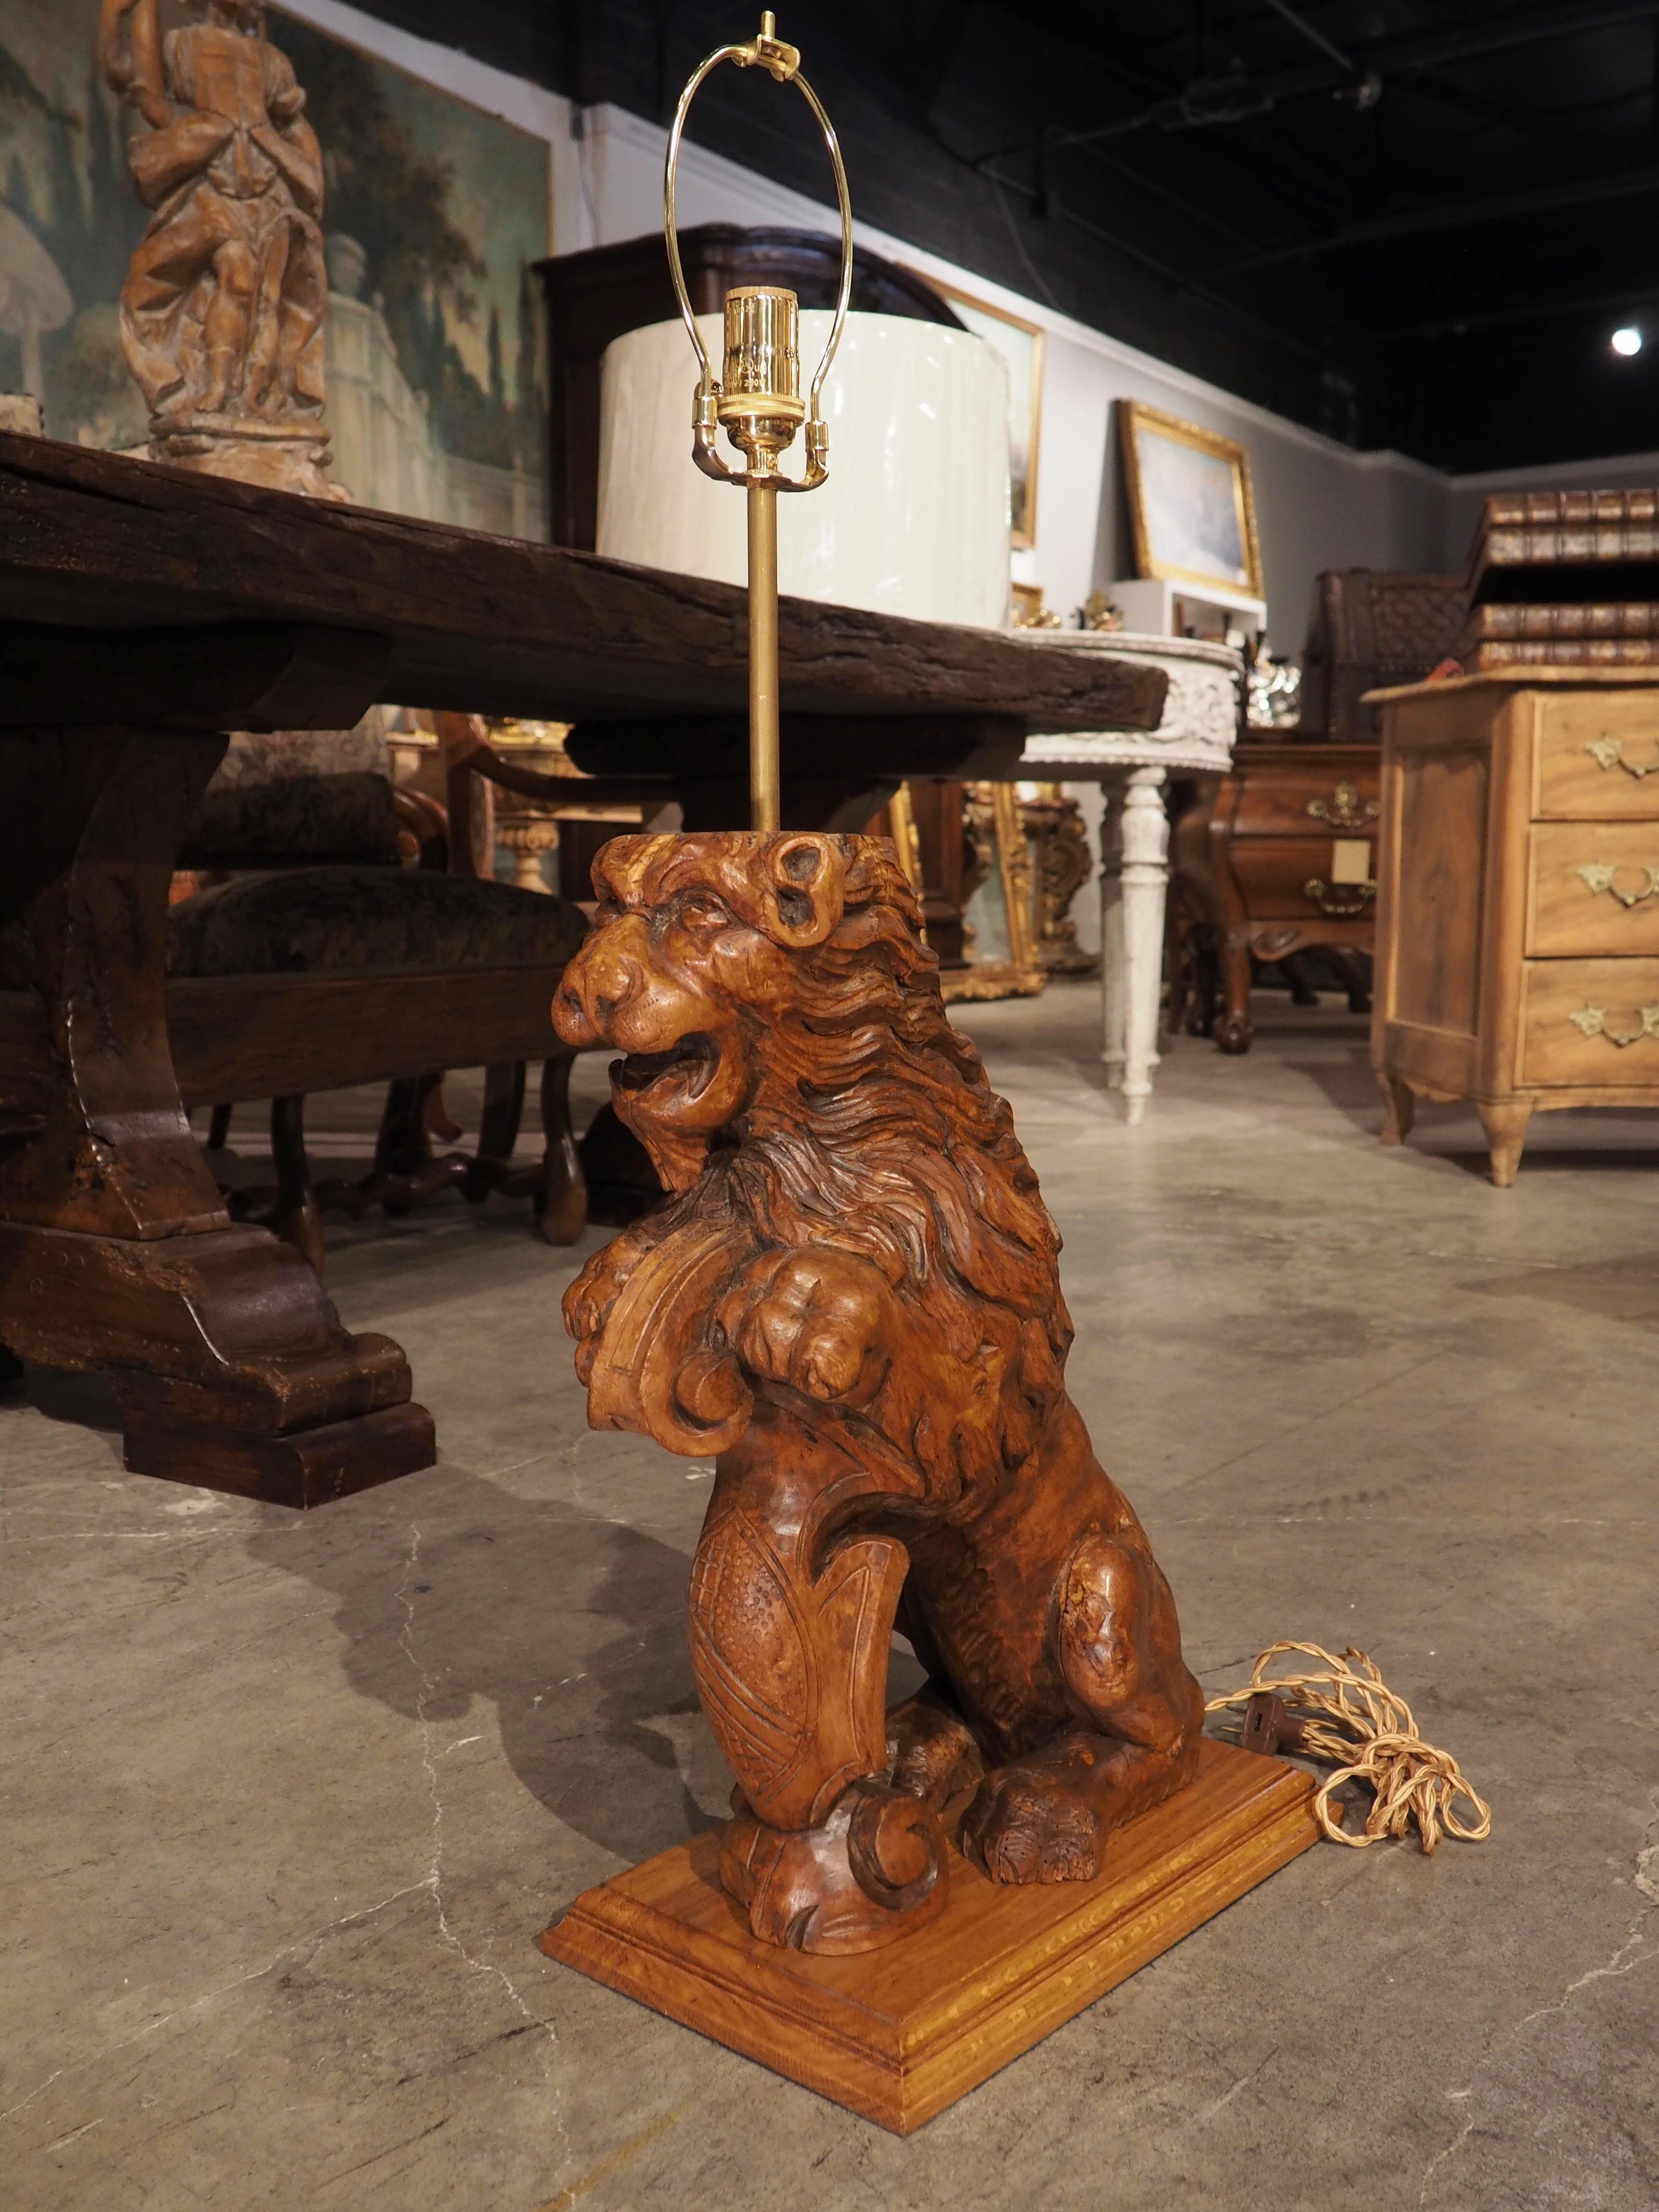 The lion has been a symbol of England since the late 12th century, when King Richard I (Richard the Lionheart) adopted the animal for his first Great Seal. This lion was carved out of pine in England during the 1700’s and has since been repurposed